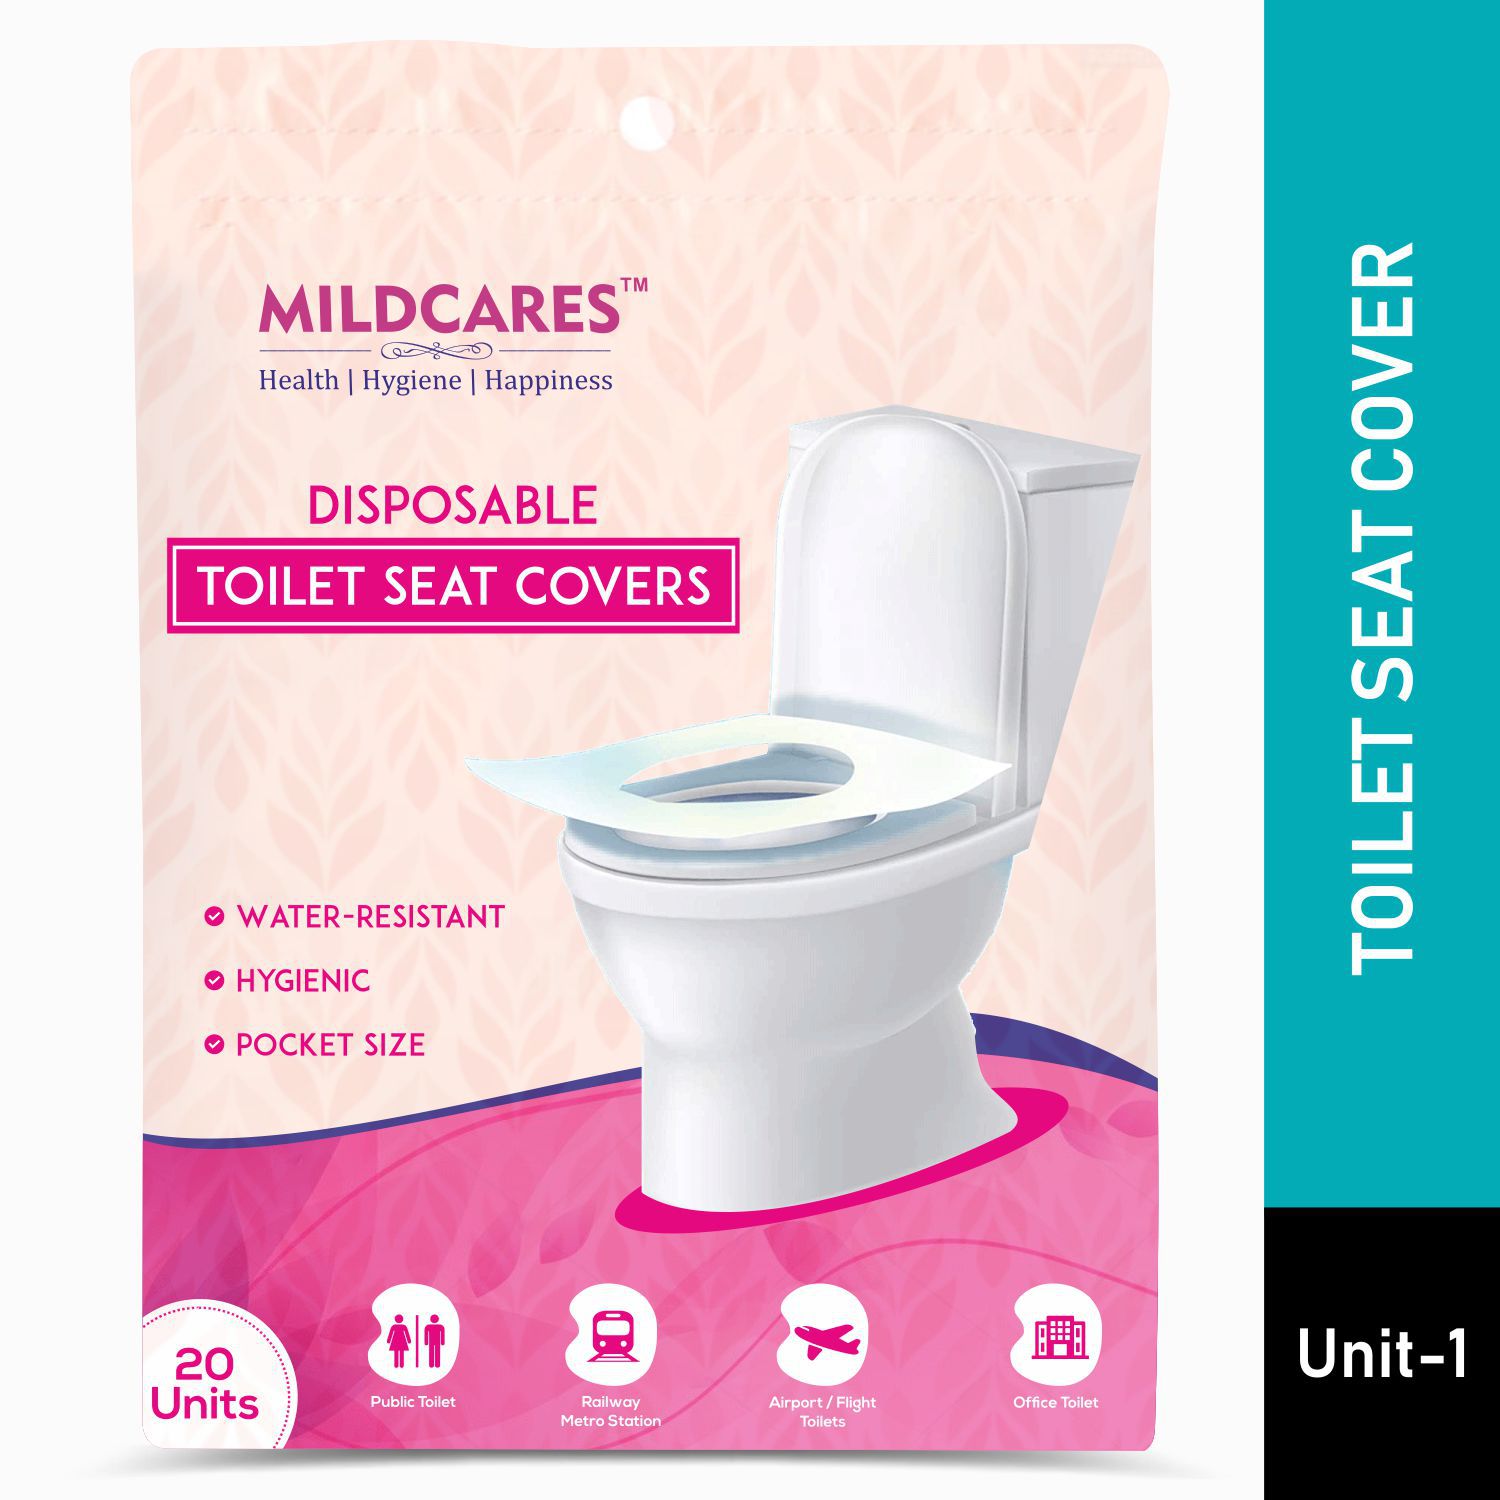 GynoCup Disposable Toilet Seat Covers| No Direct Contact with Unhygienic & Dirty Toilet Seats| Water-Resistant & Hygienic 